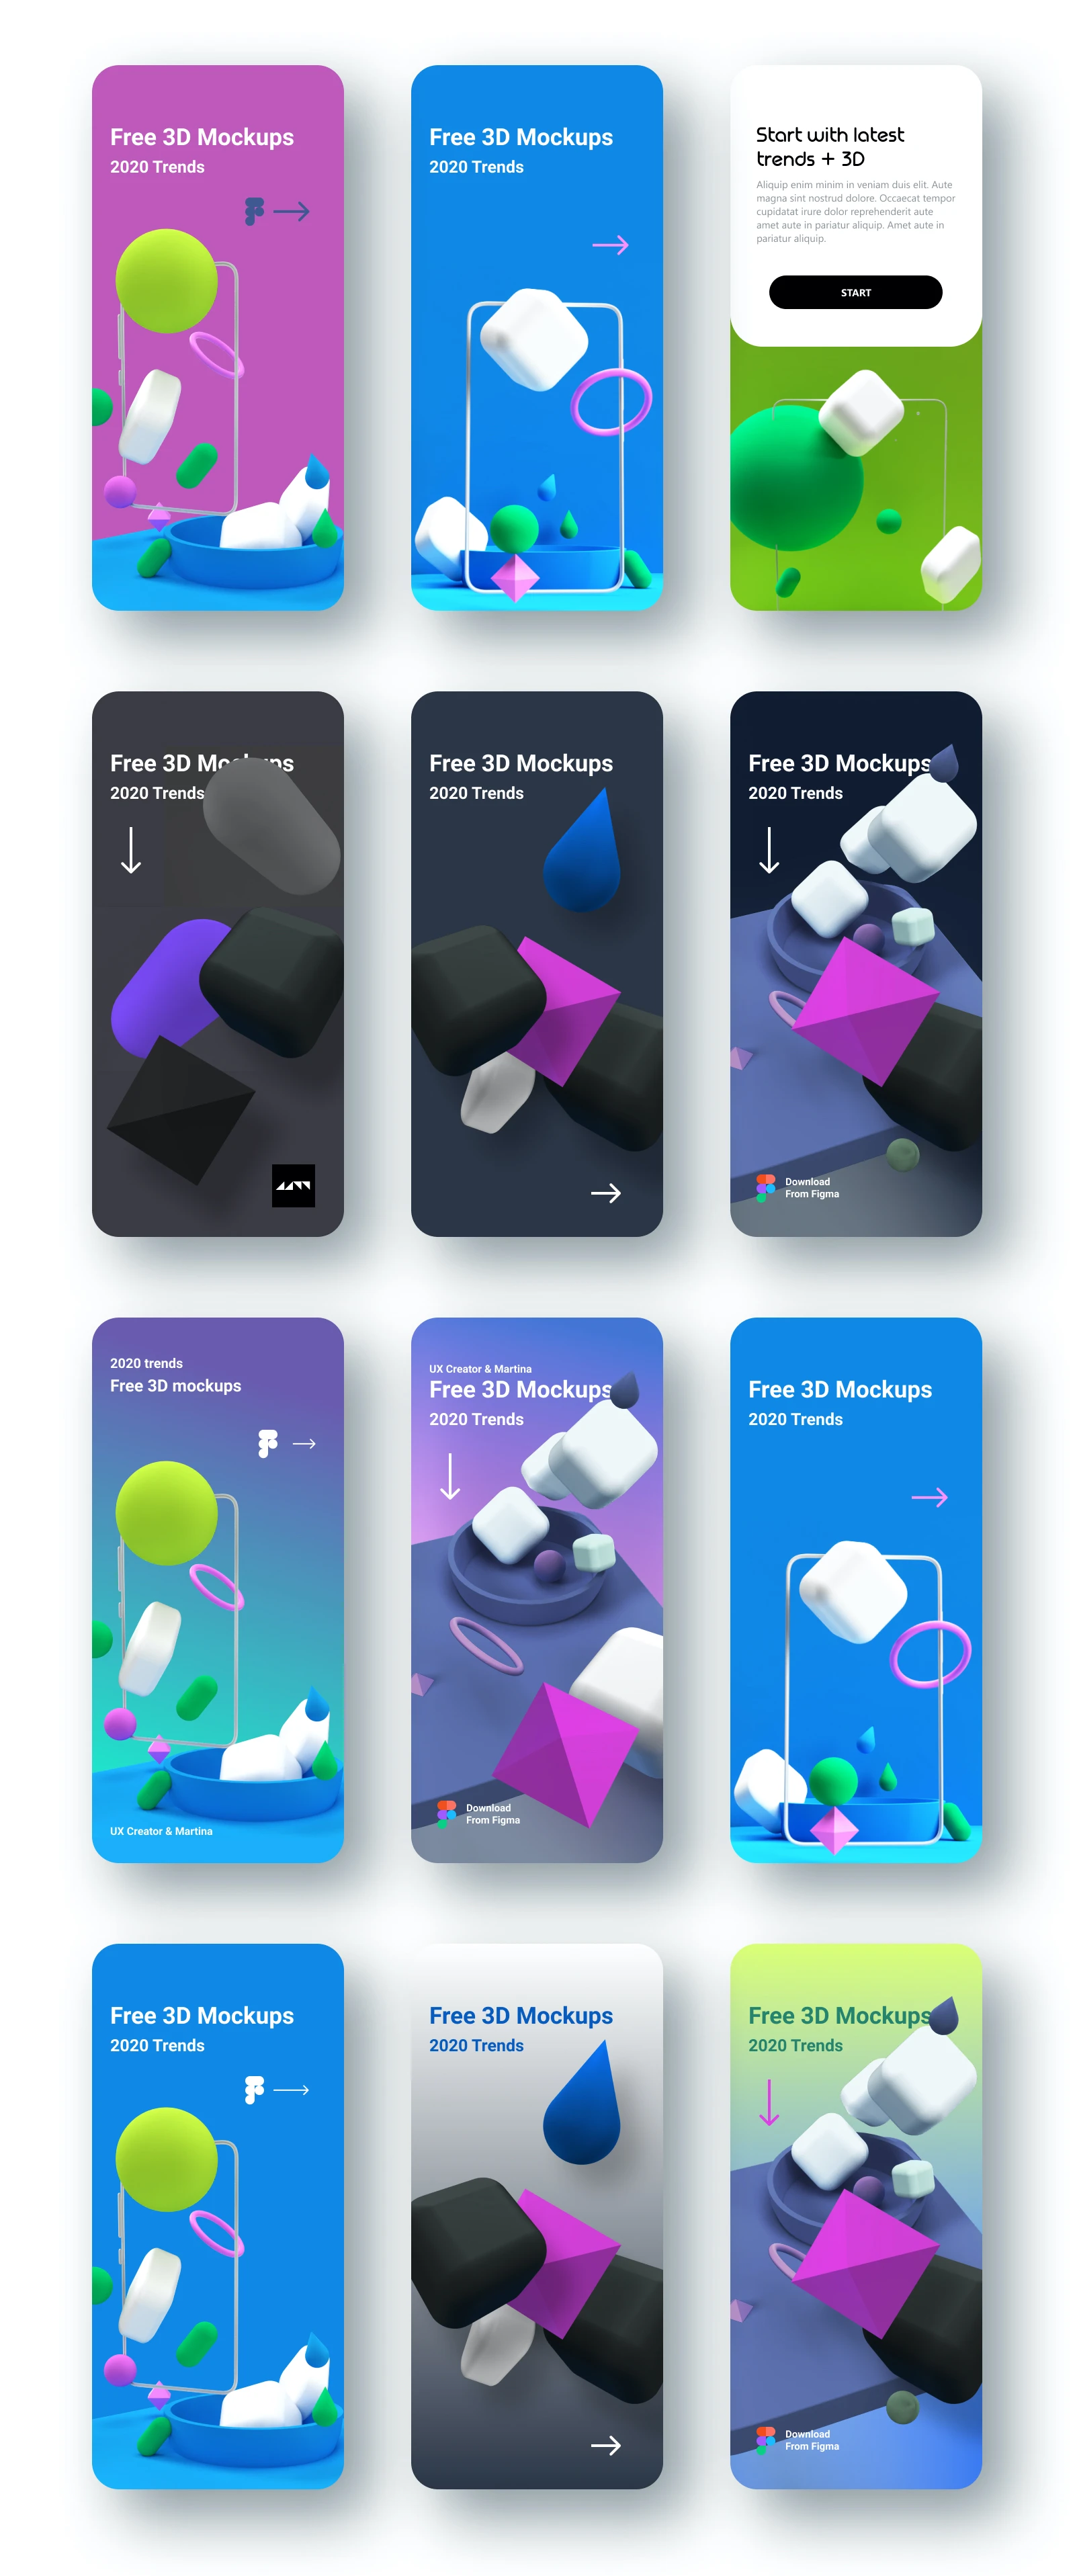 3D Models App Mockups for Figma - 3D models are currently a popular trend in web design. 3D illustrations are very often used in the design of landing pages for apps or websites. Consists of 26 shapes, 22 compositions, and 12 mockups for demonstration purposes.